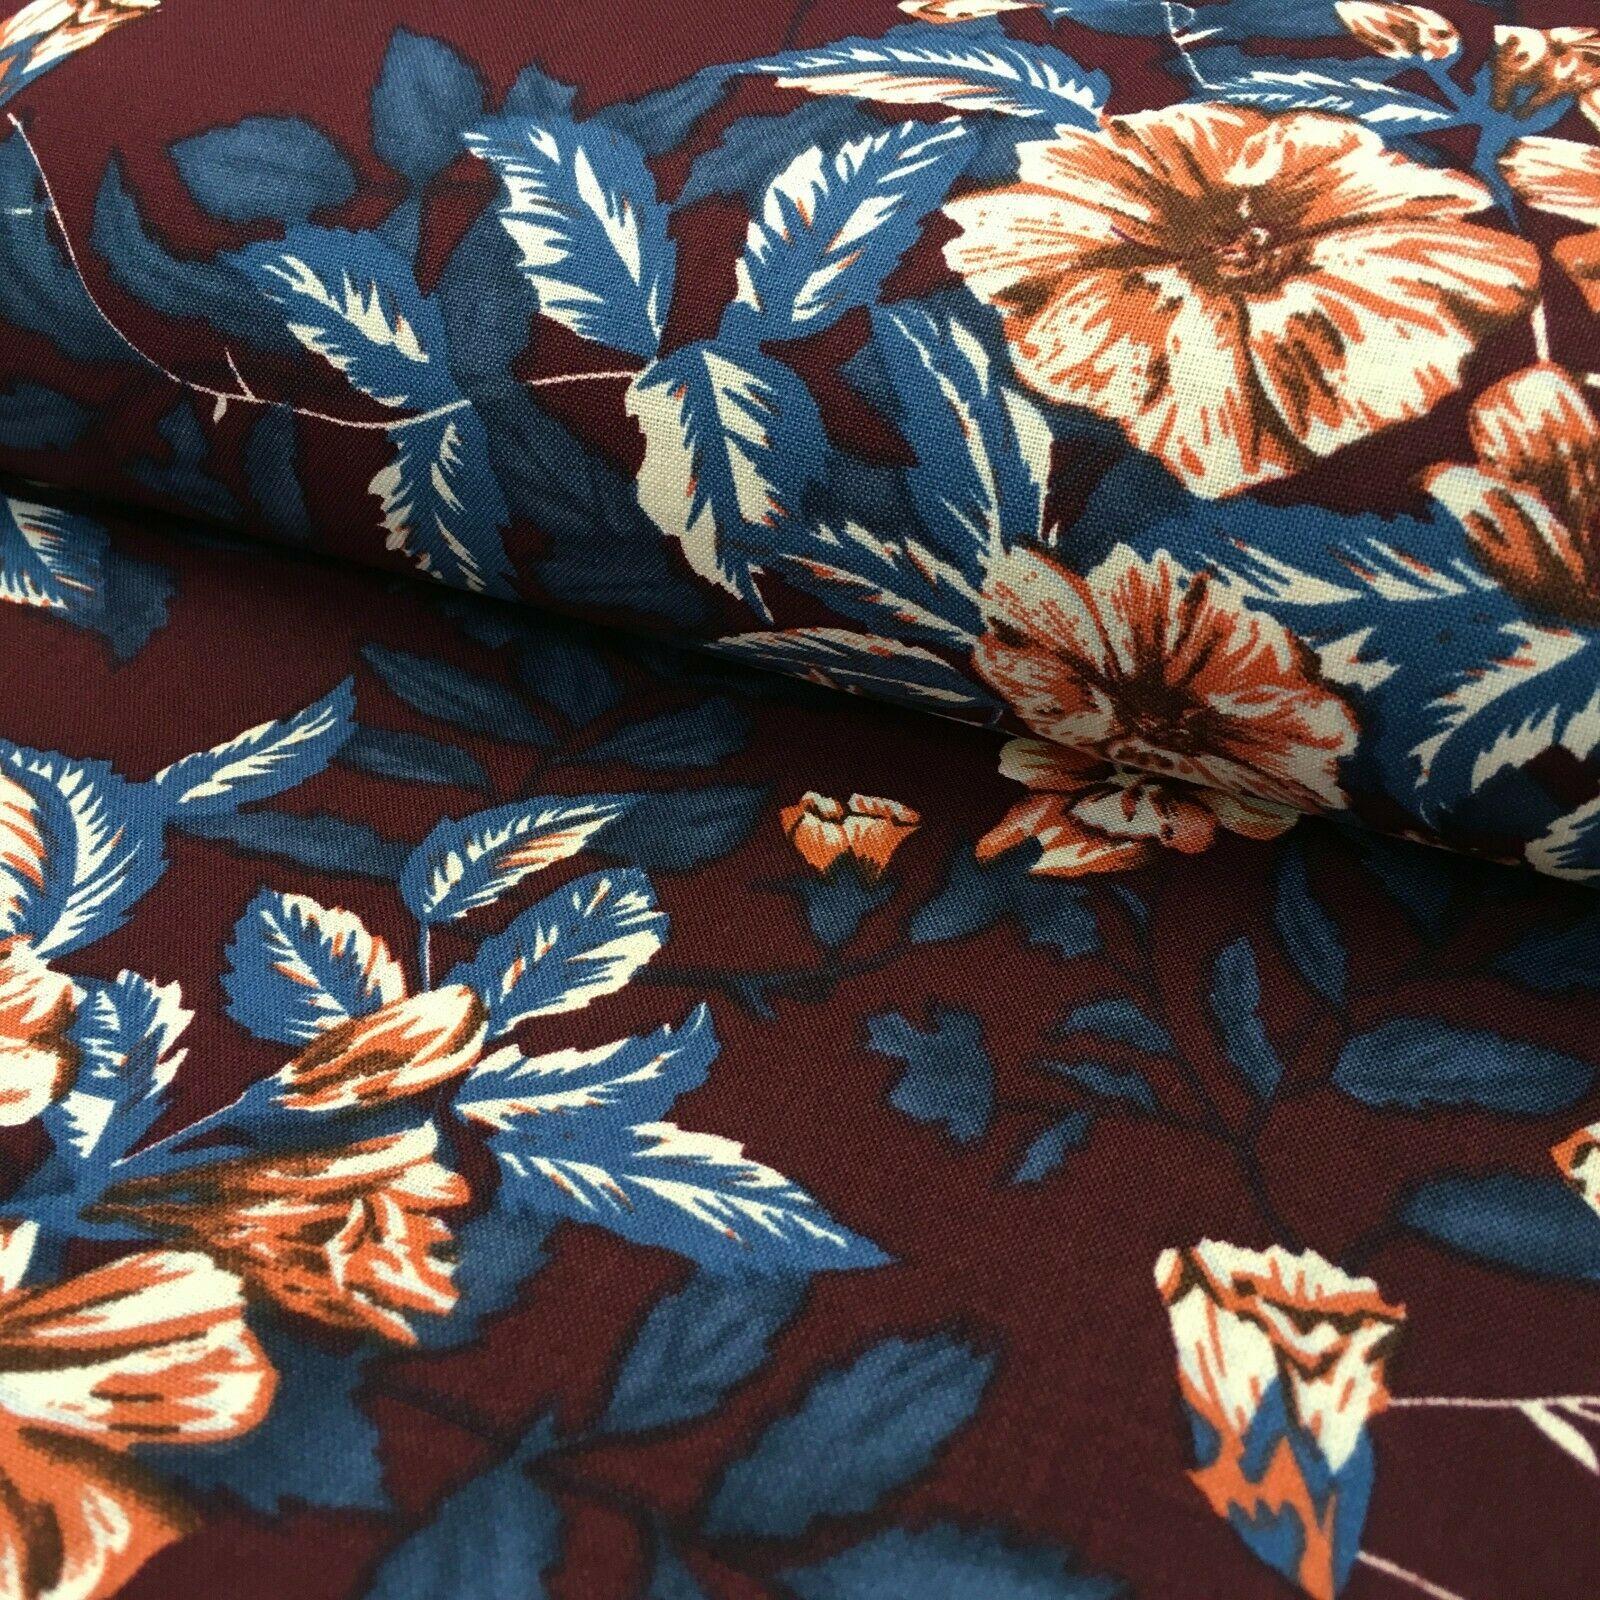 Wine Teal Floral Printed Cotton Linen Dress Fabric 150cm Wide MK1086-9